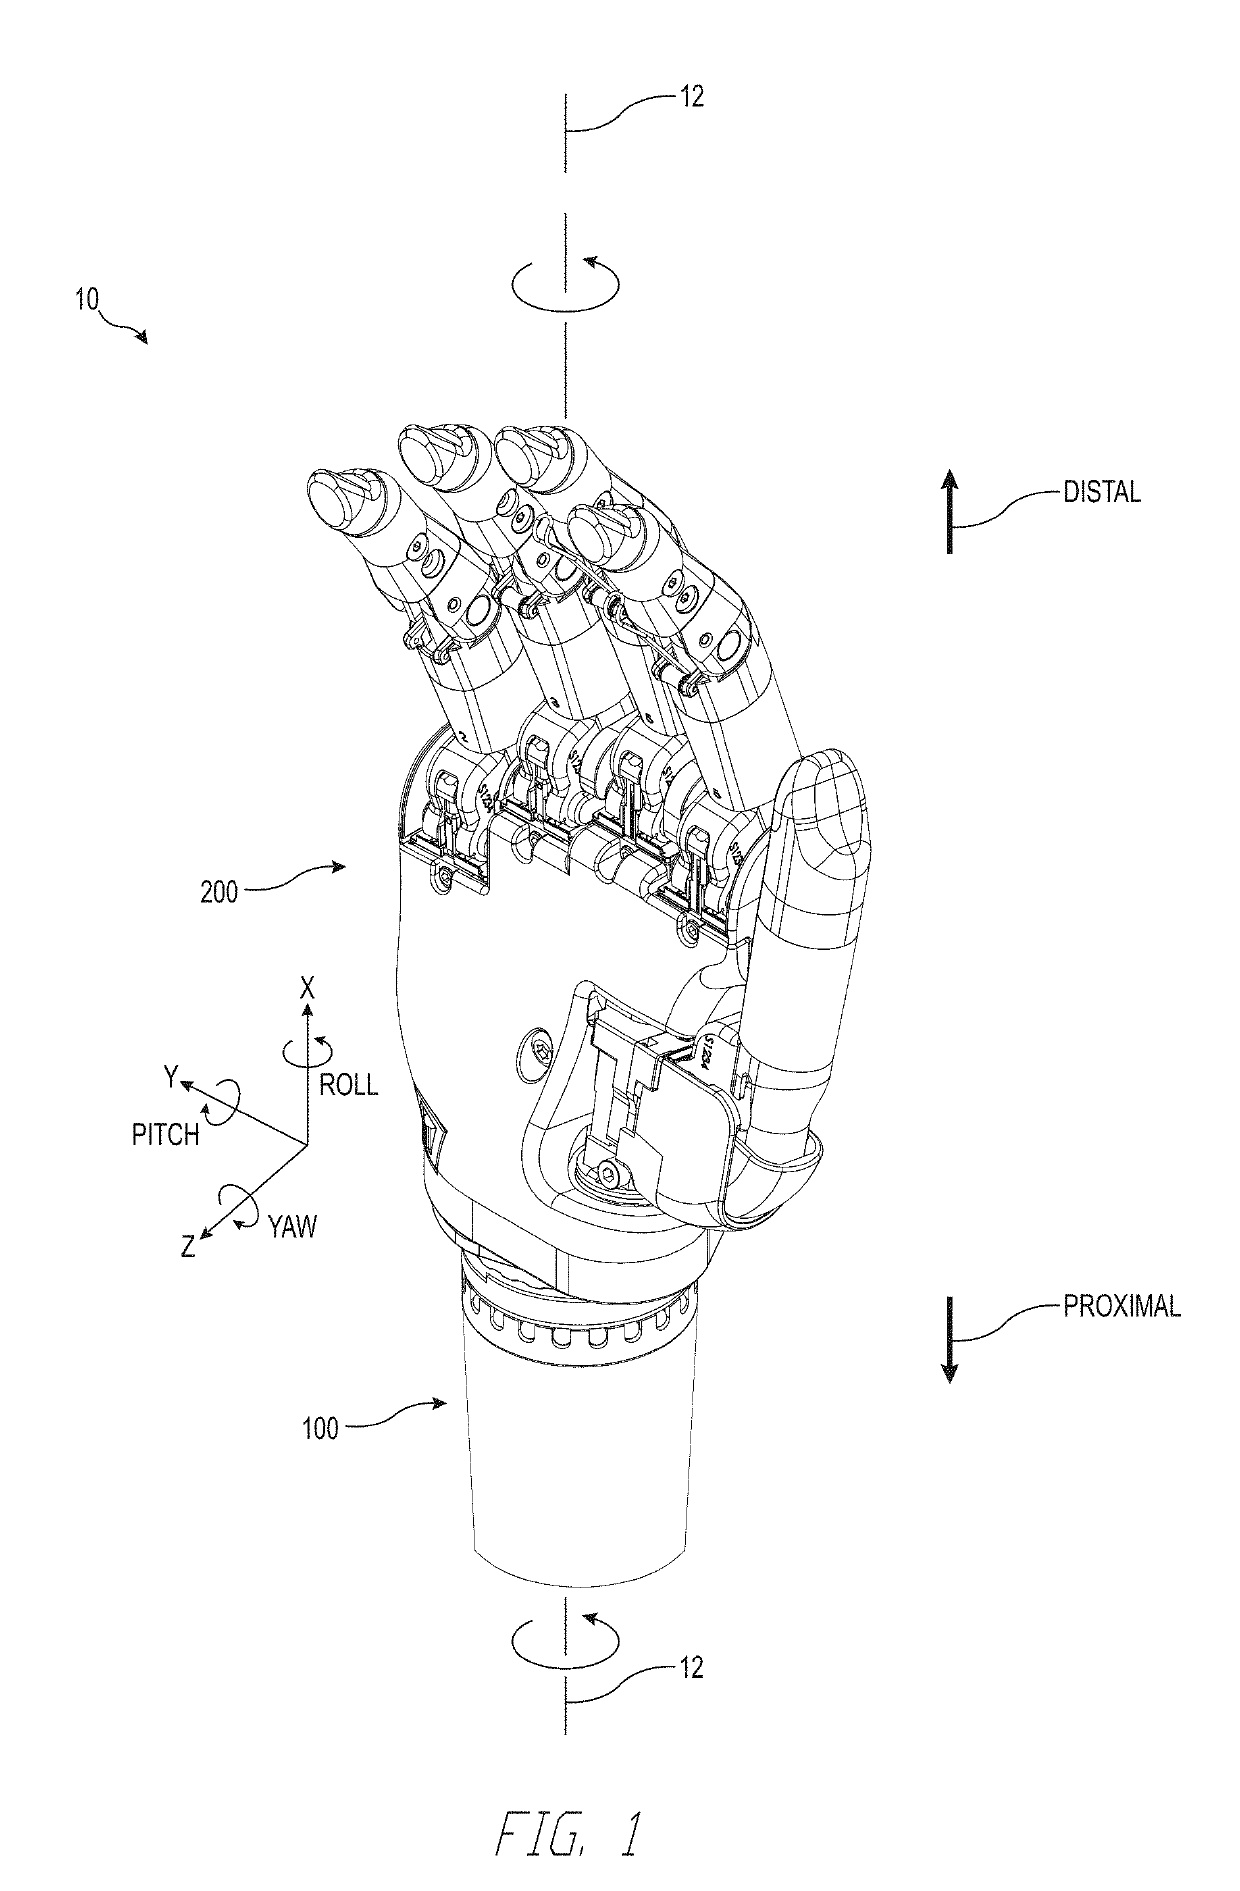 Systems and methods for prosthetic wrist rotation